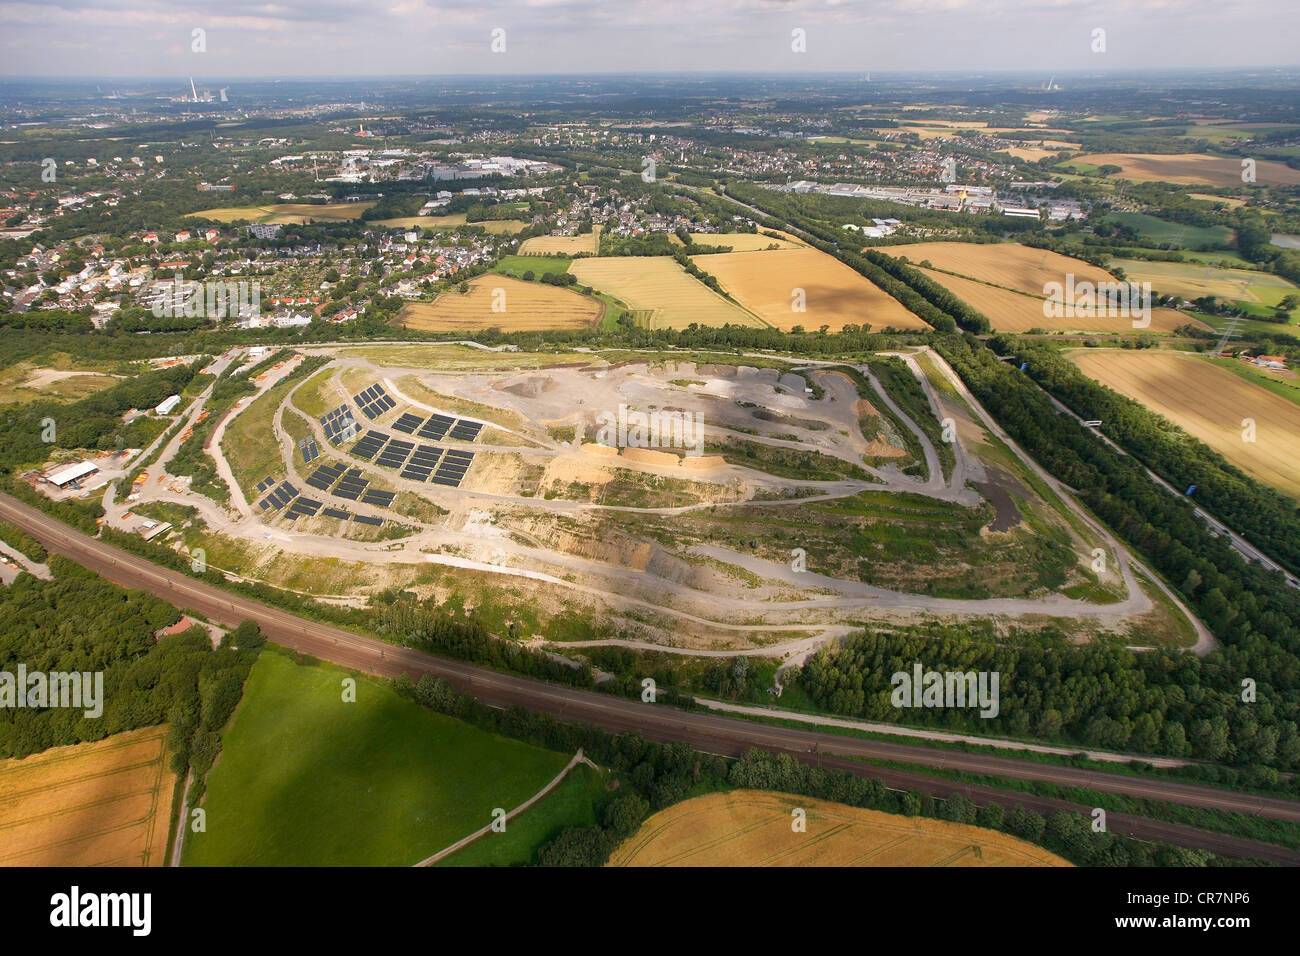 Aerial view, Kornharpen main waste disposal site with solar panels, Bochum, Ruhr Area, North Rhine-Westphalia, Germany, Europe Stock Photo